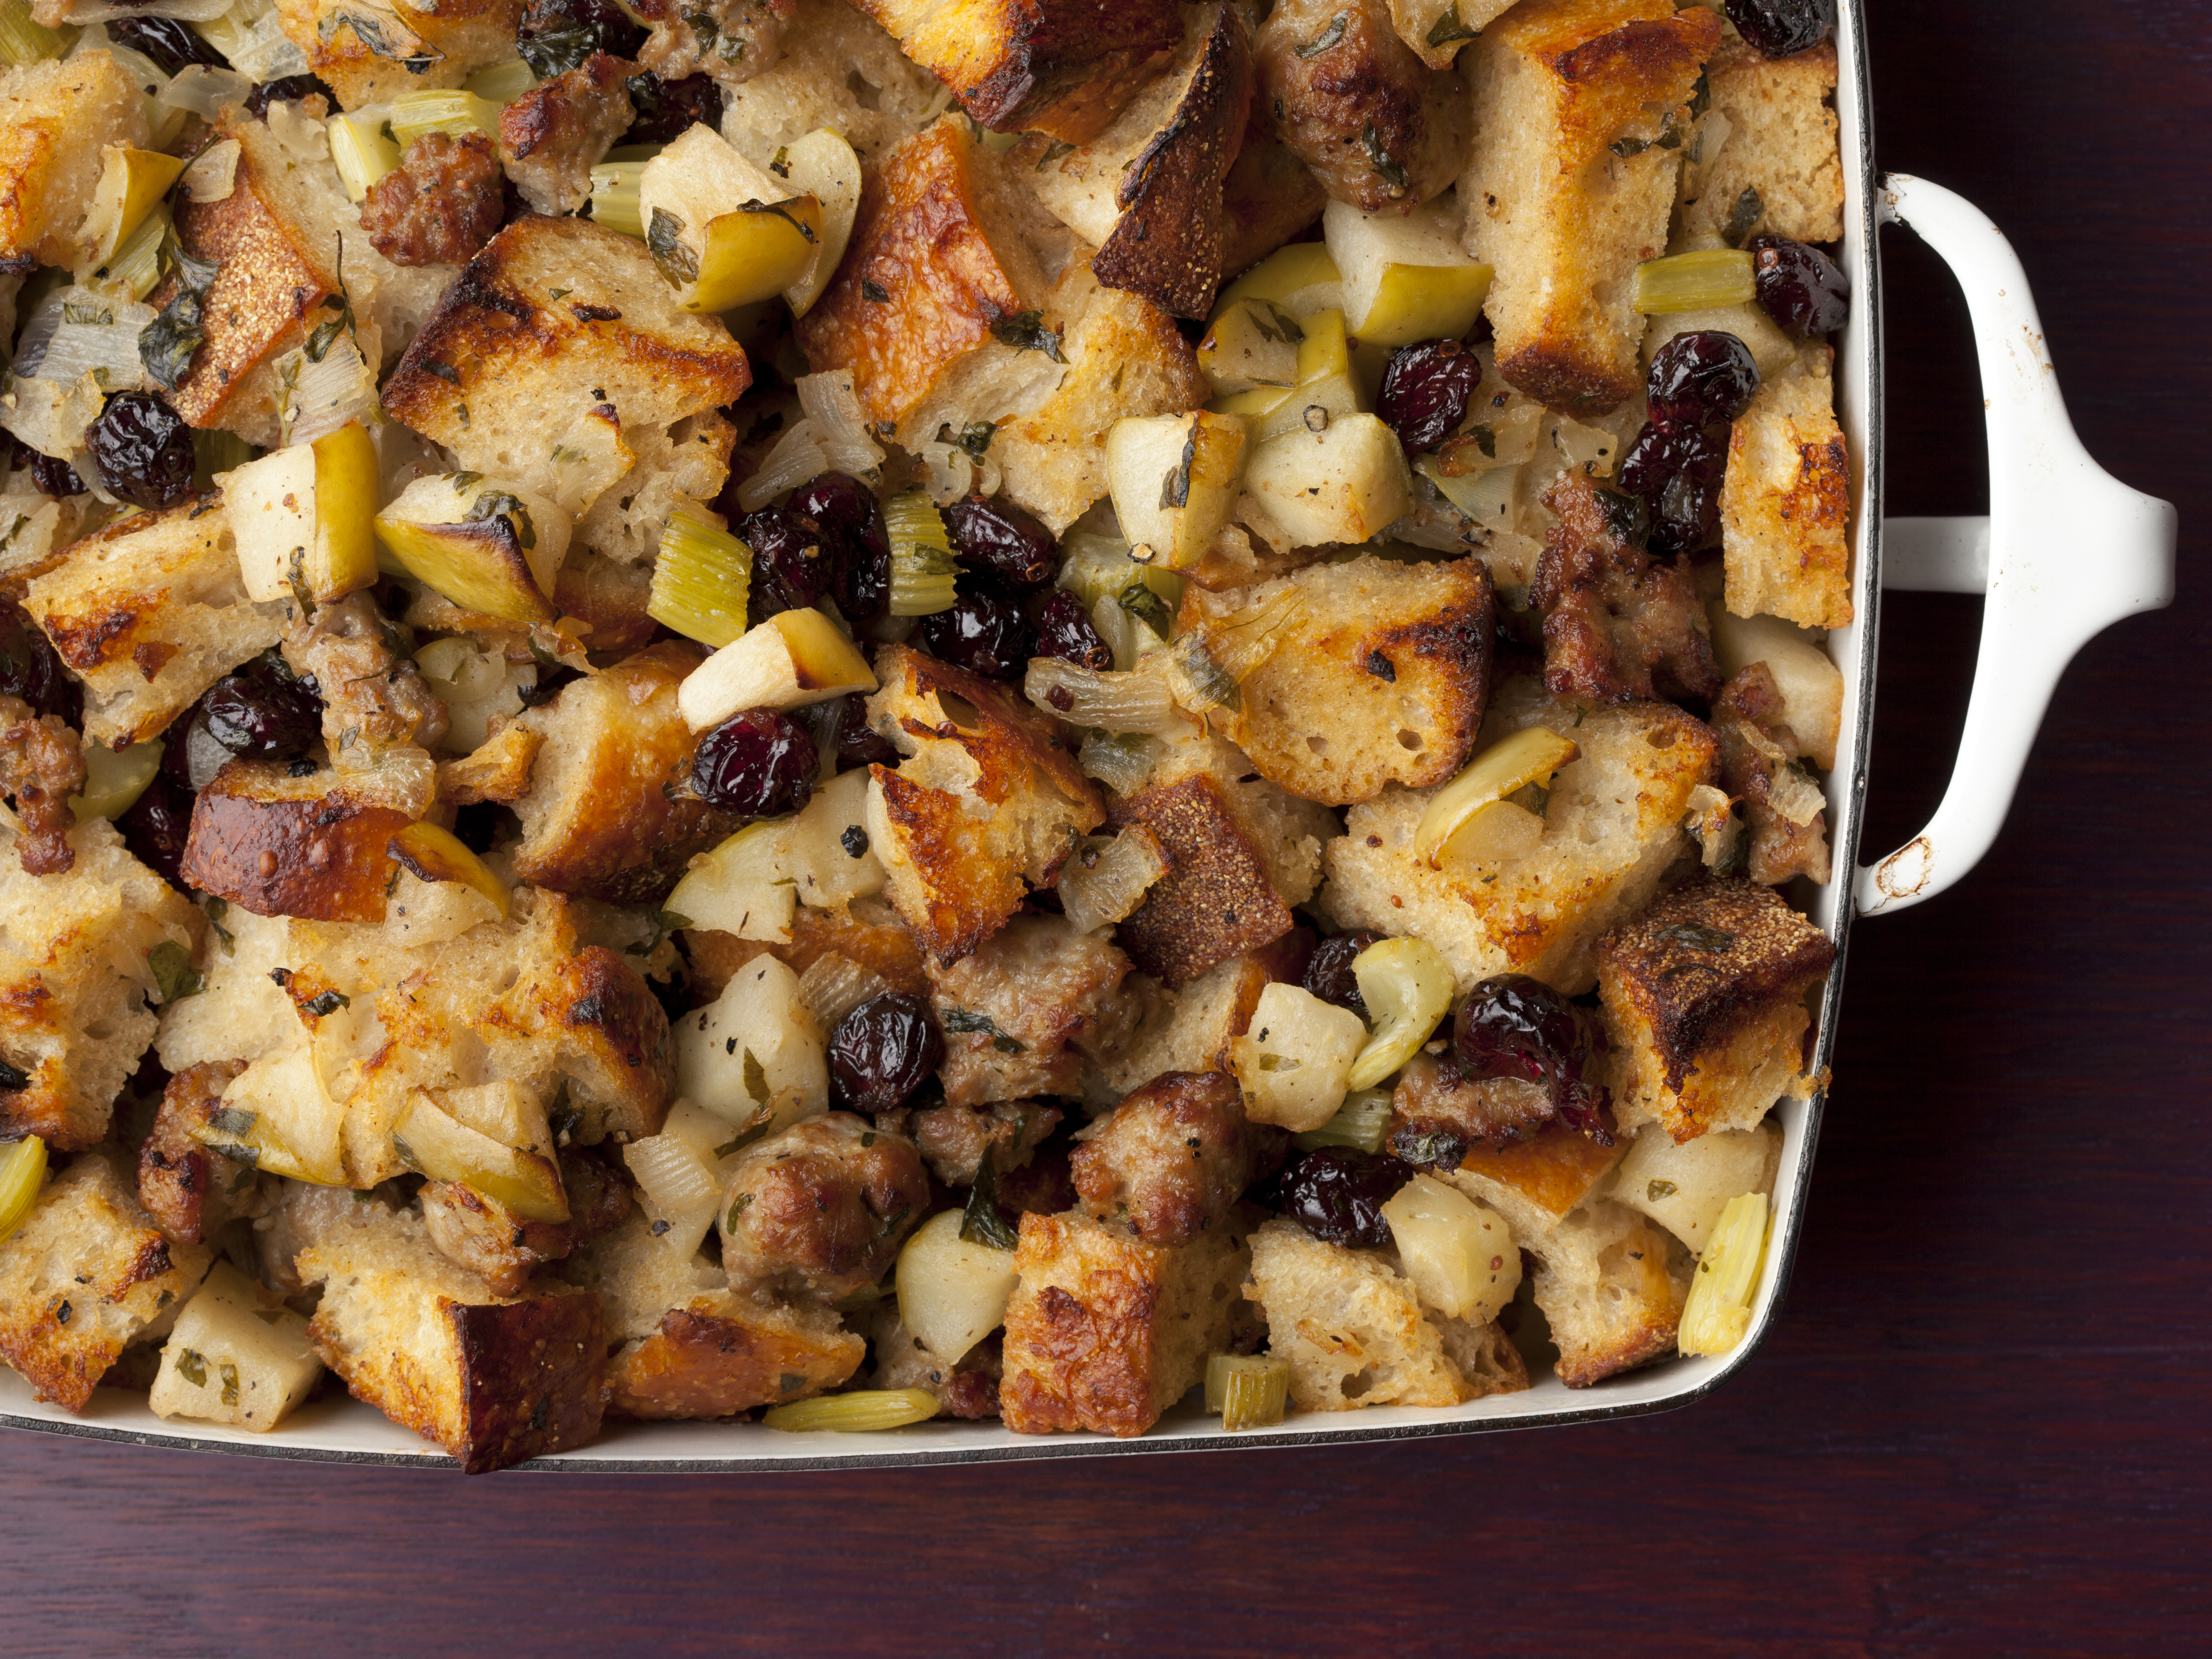 https://www.foodnetwork.com/content/dam/images/food/fullset/2011/8/10/0/Thanksgiving-2011_BX0105-sausage-and-herb-stuffing_s4x3.jpg